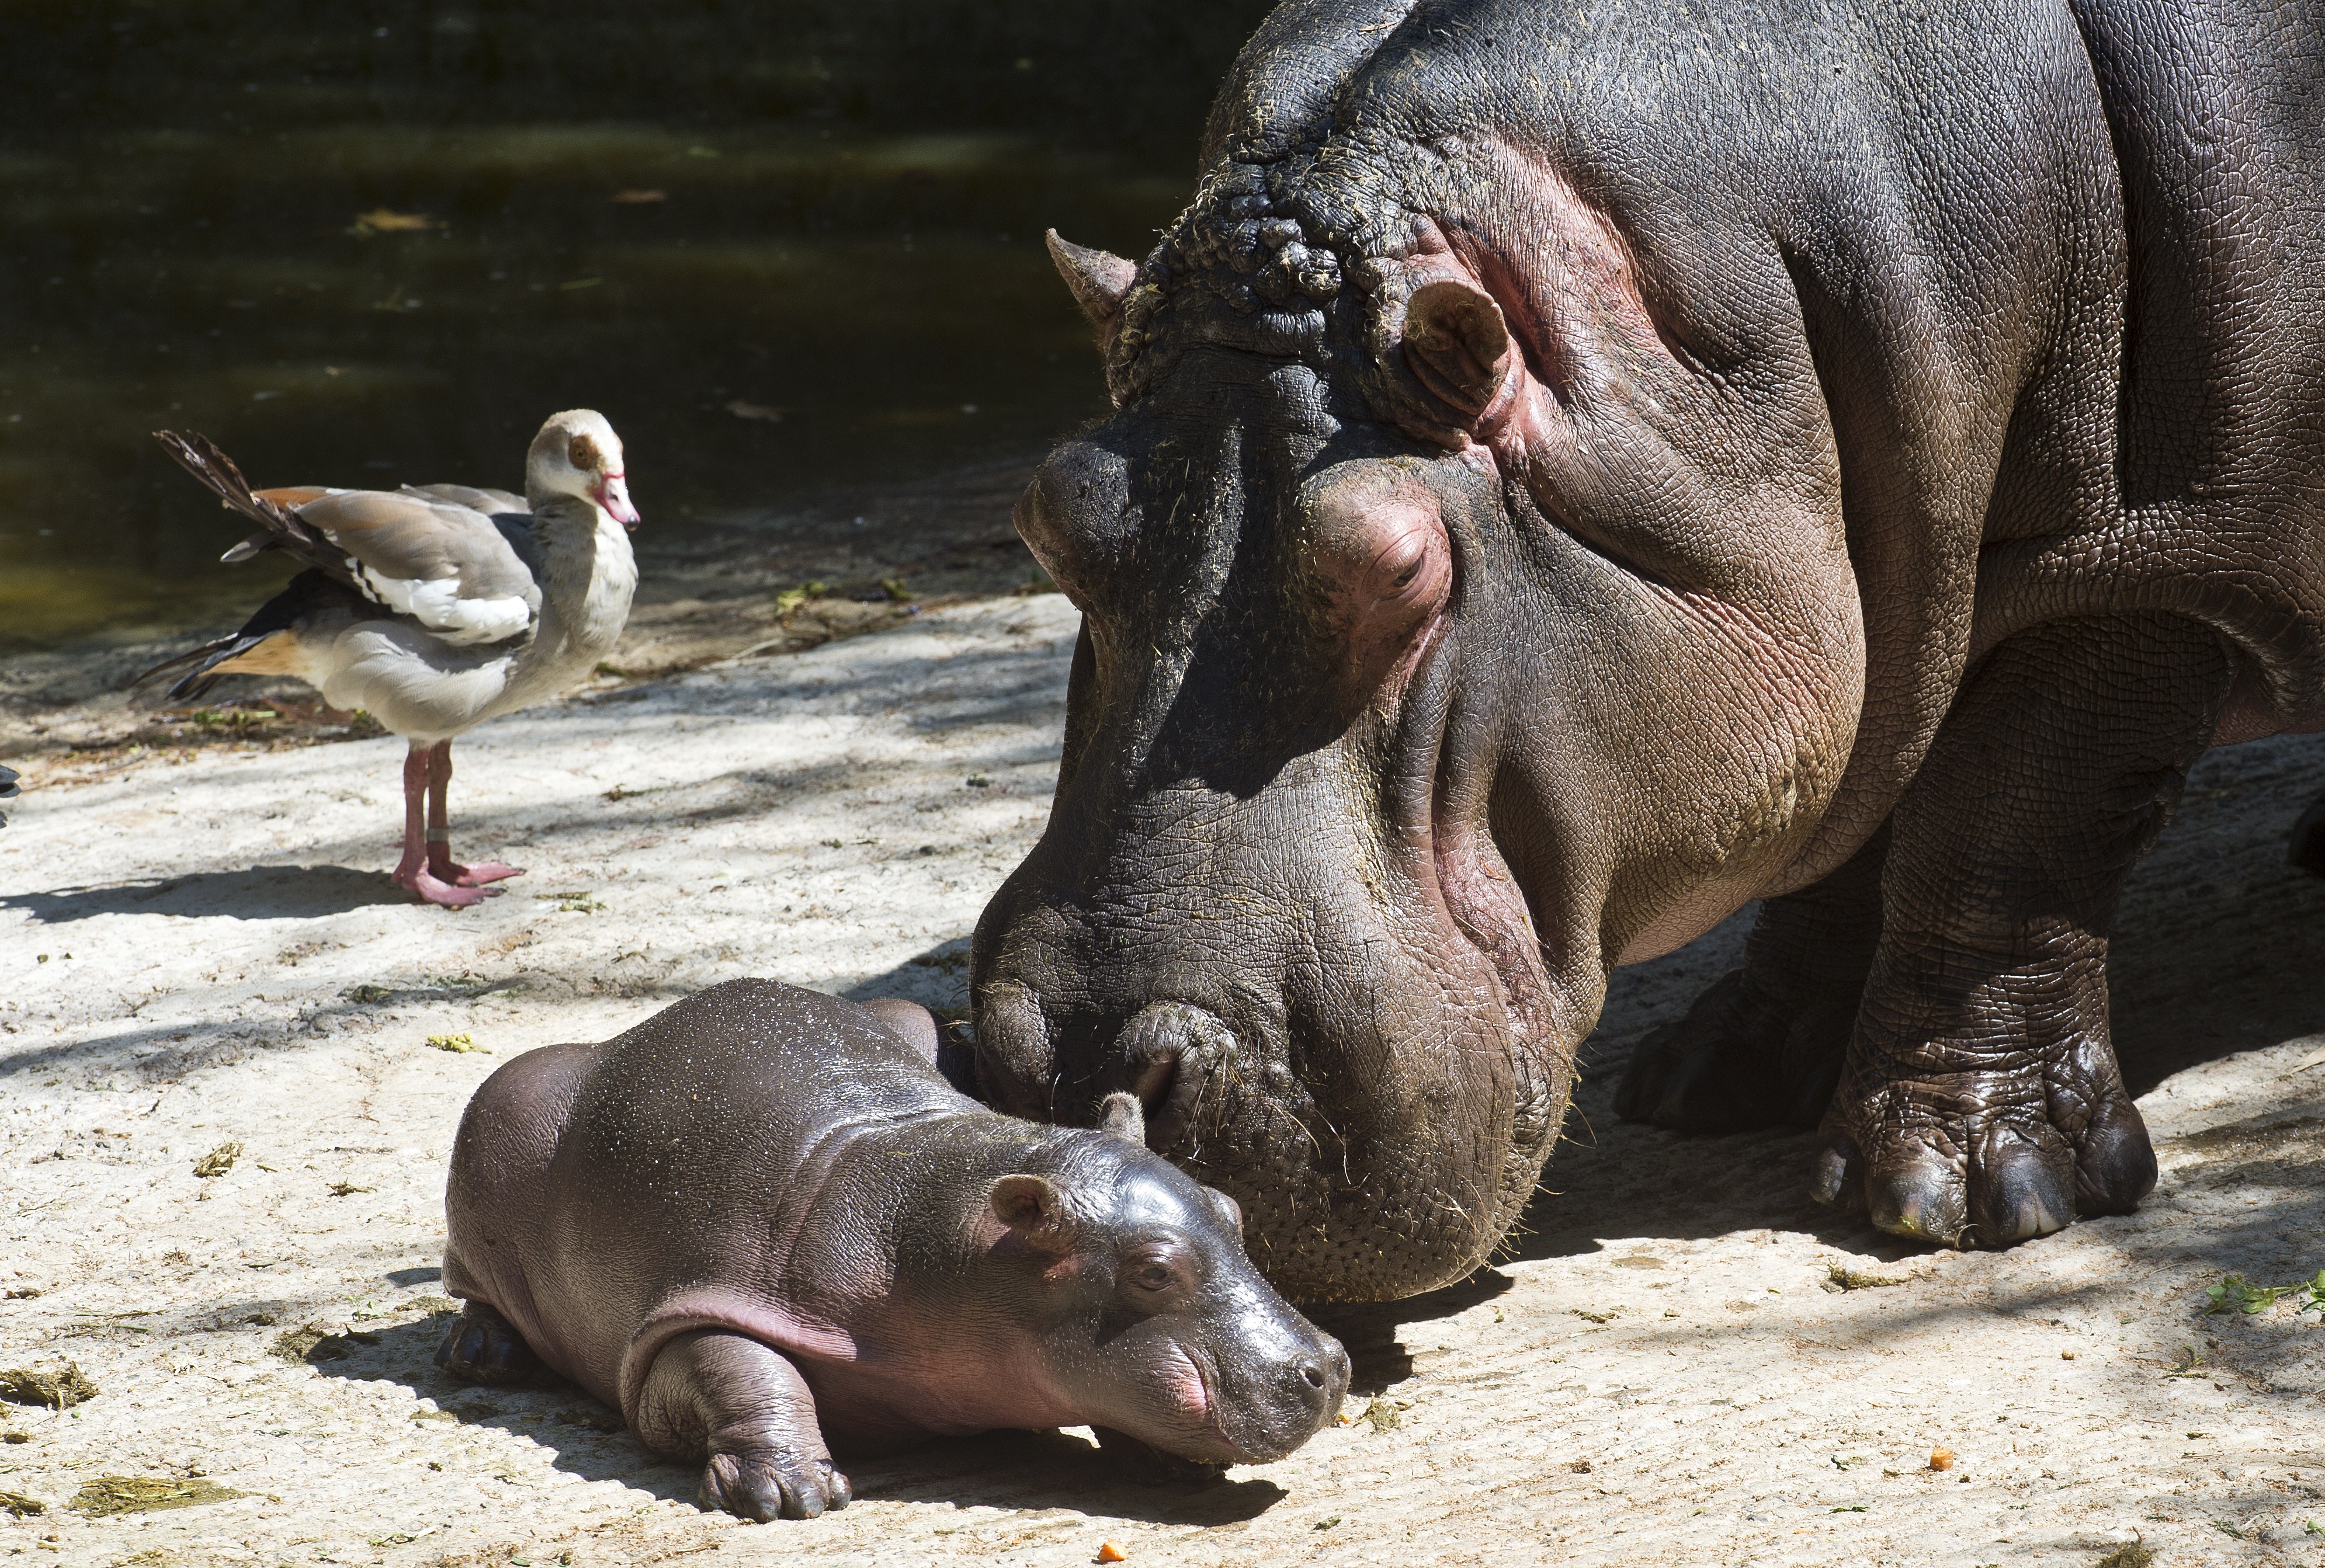 A 9-day old hippo tries to walk helped by its mother at the Chapultepec Zoo, in Mexico City, on March 5, 2014.